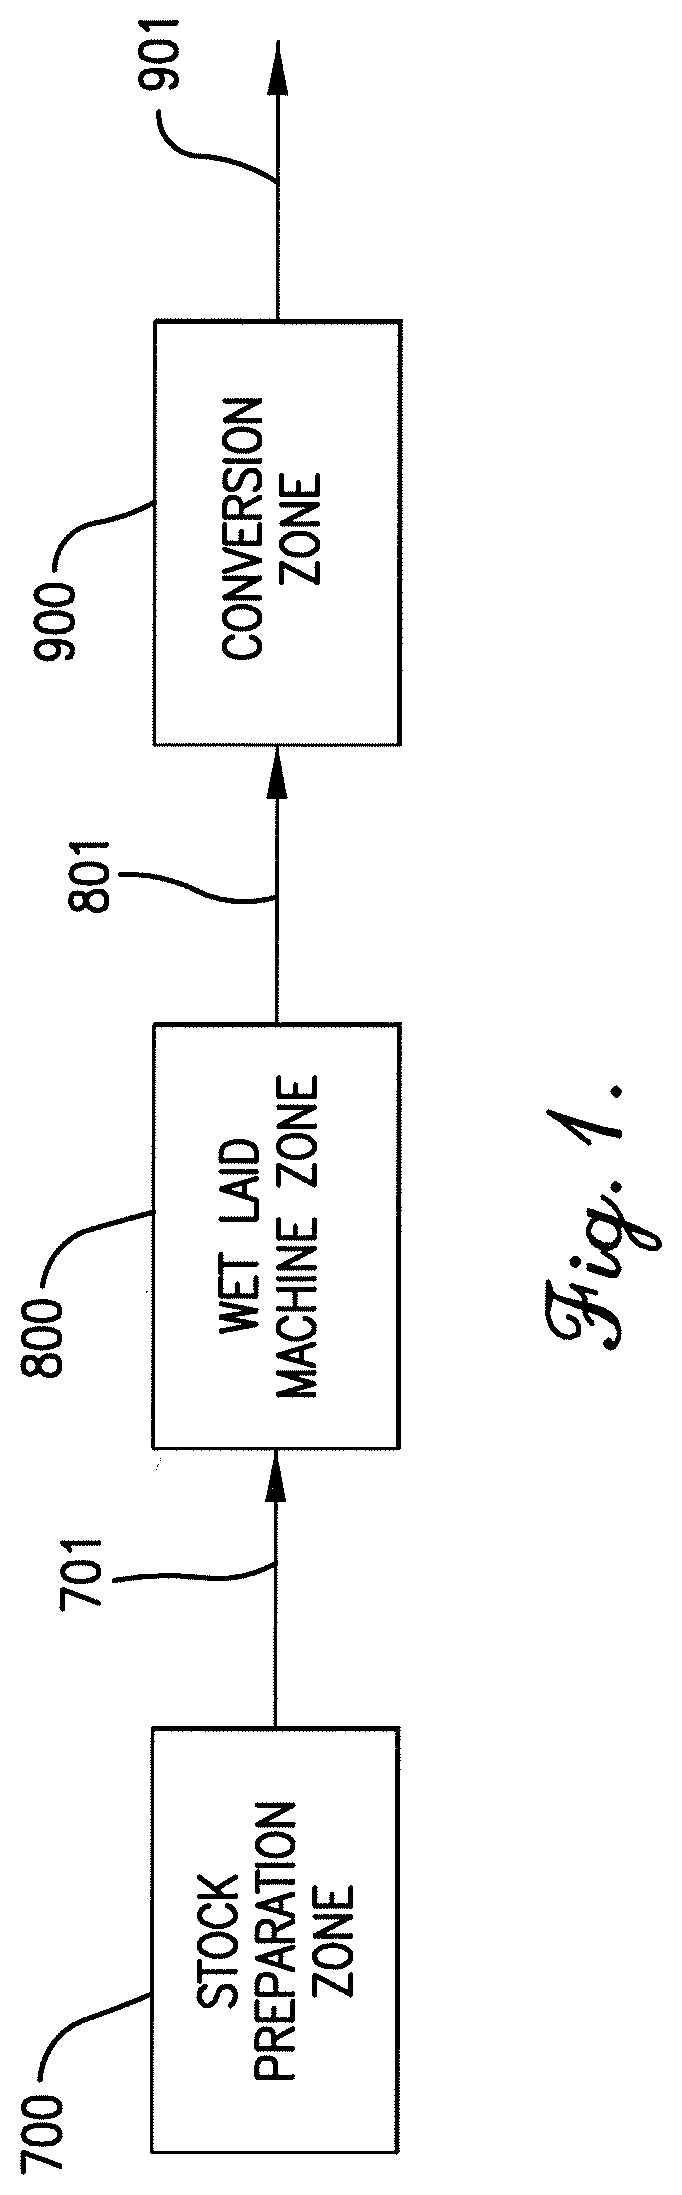 Paper composition cellulose and cellulose ester for improved texturing